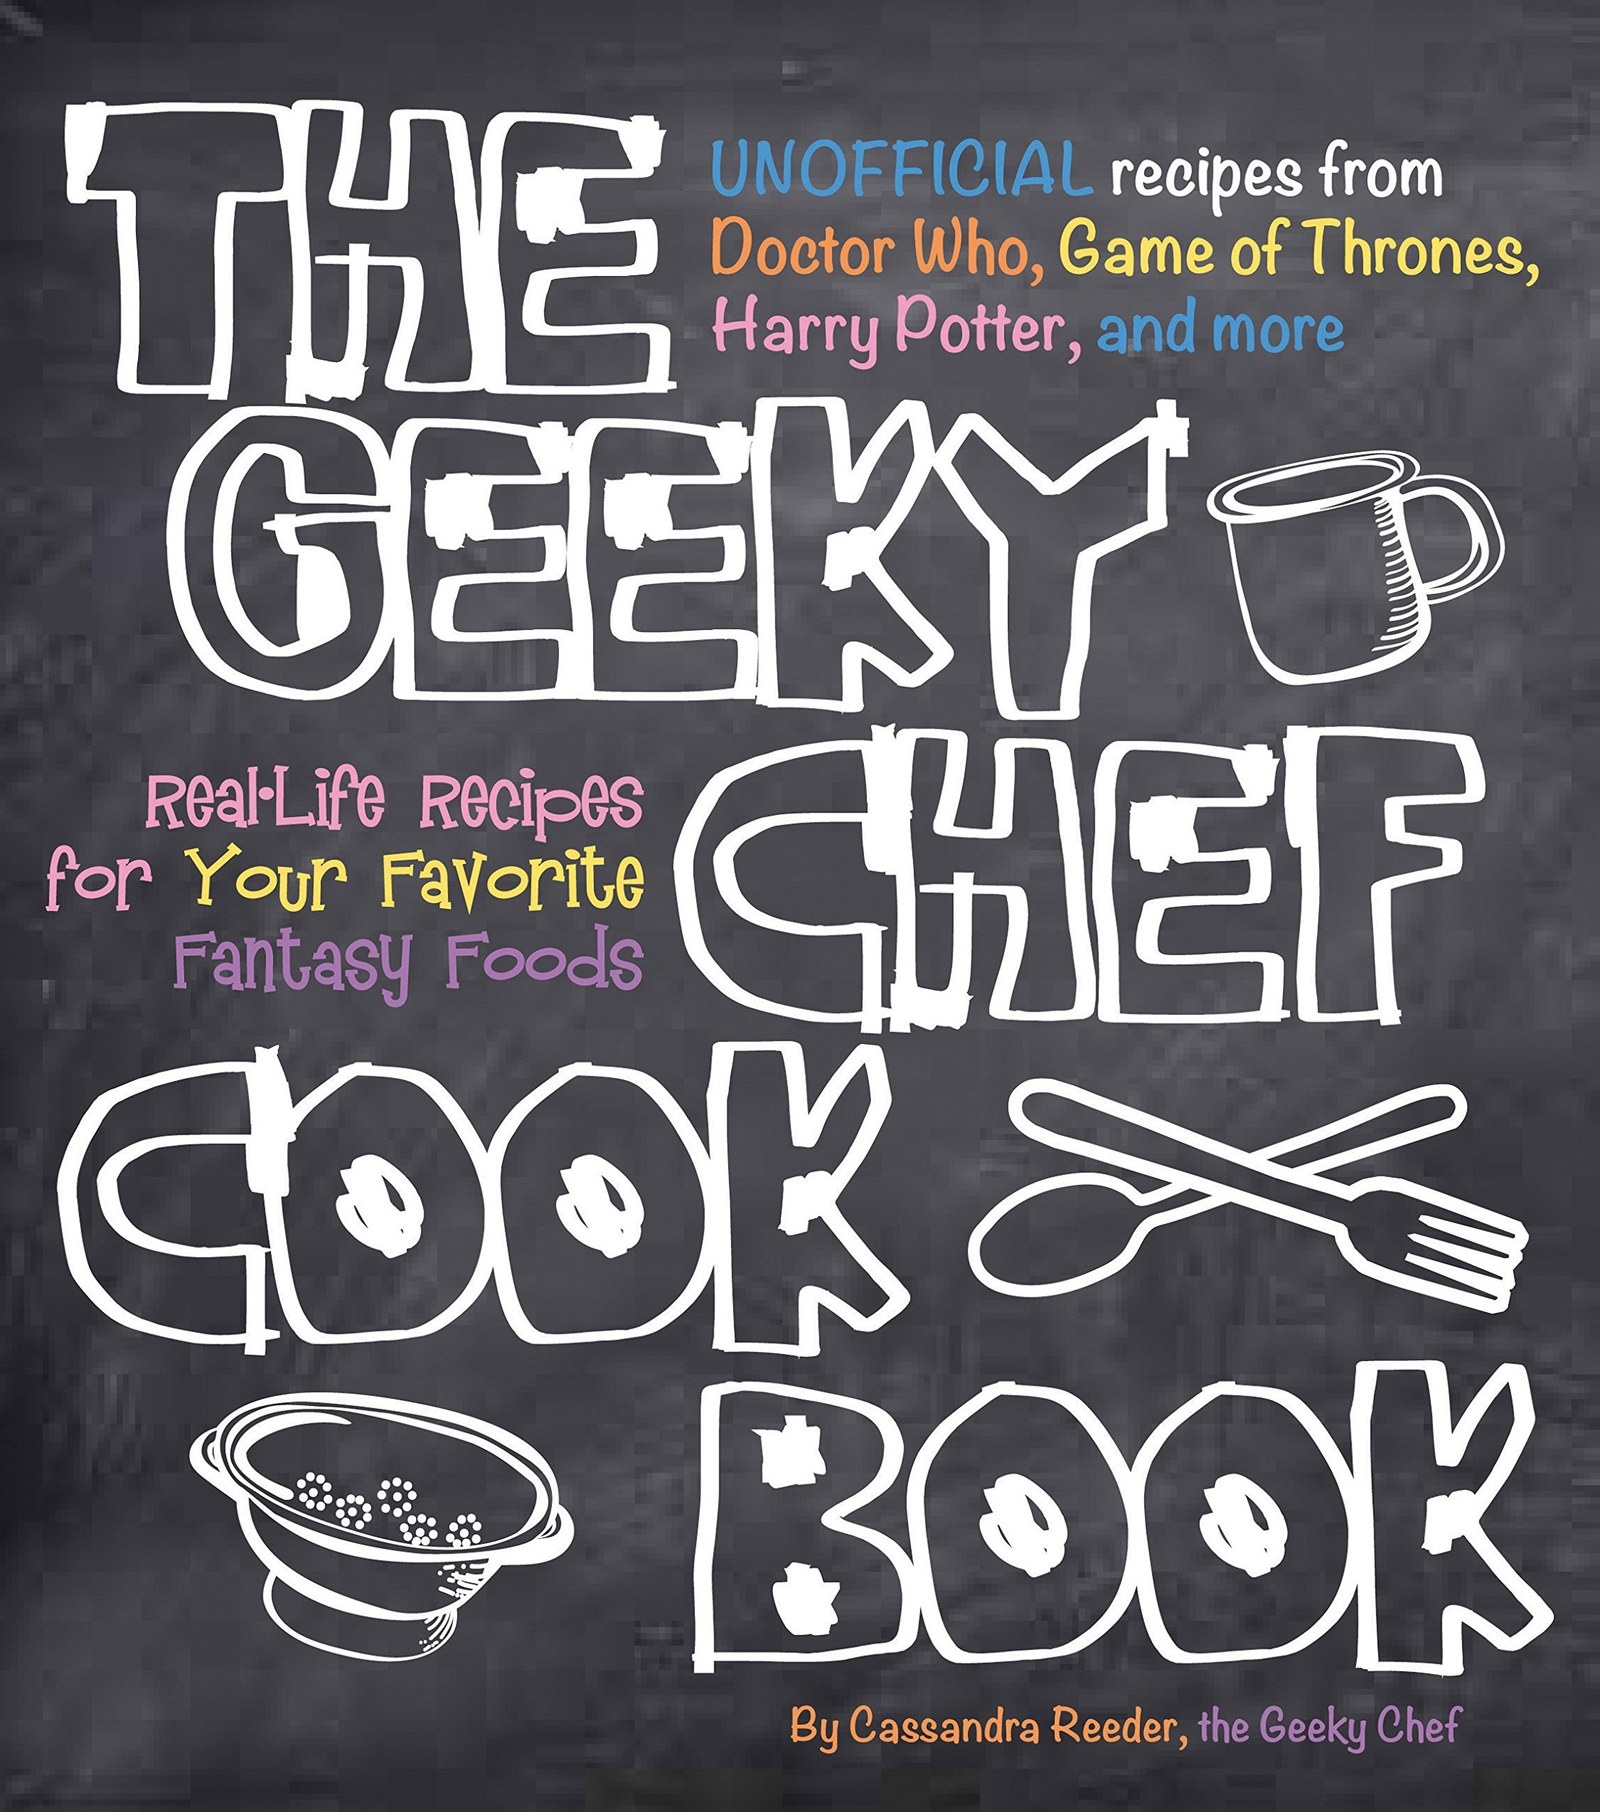 Any interesting or fun cookbooks you'd recommend? : r/CookbookLovers